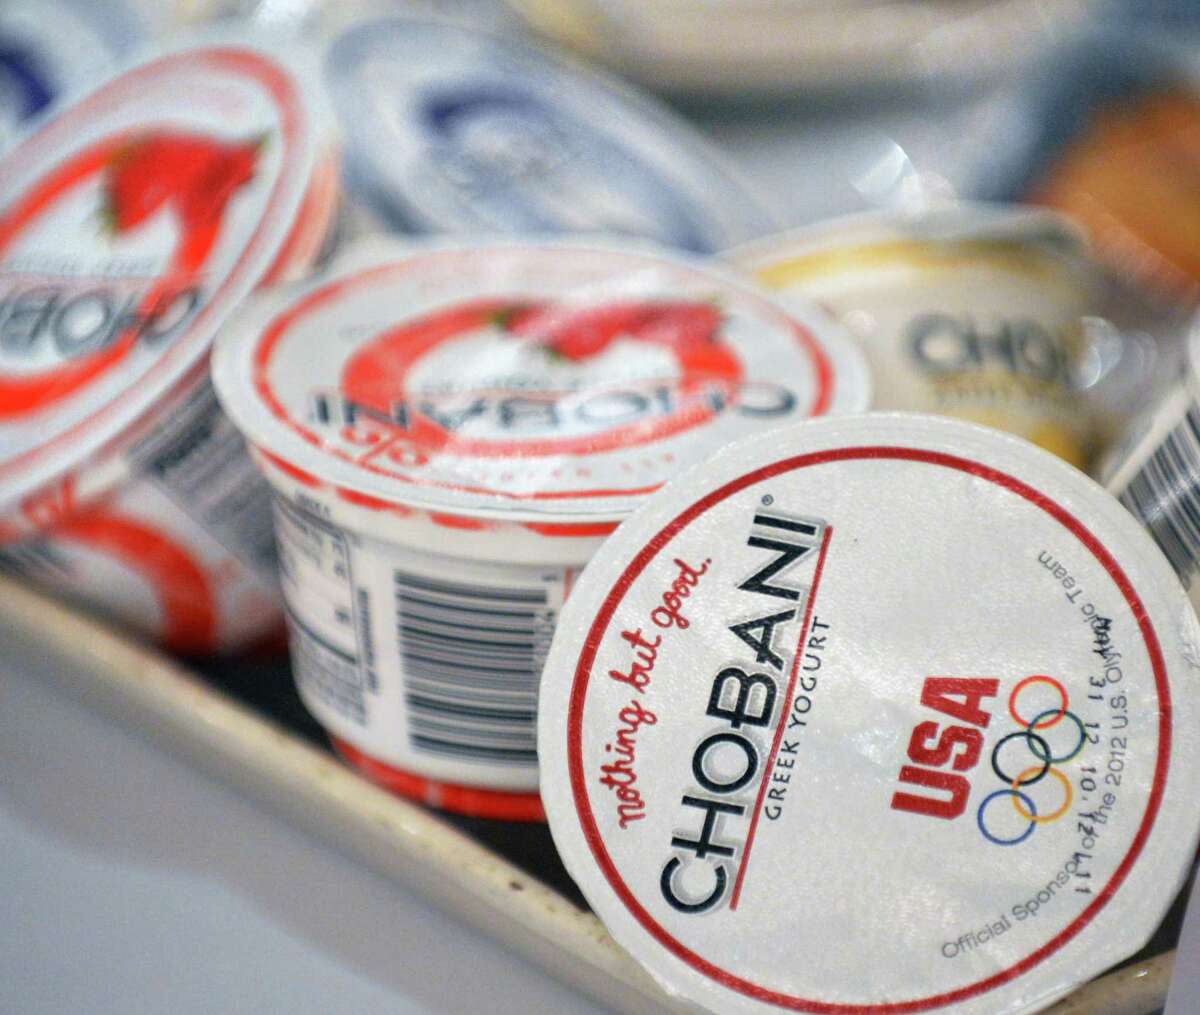 Chobani Greek yogurt on the tables during a Small Business Administration luncheon honoring Hamdi Ulukaya in Colonie Wednesday May 2, 2012. (John Carl D'Annibale / Times Union)